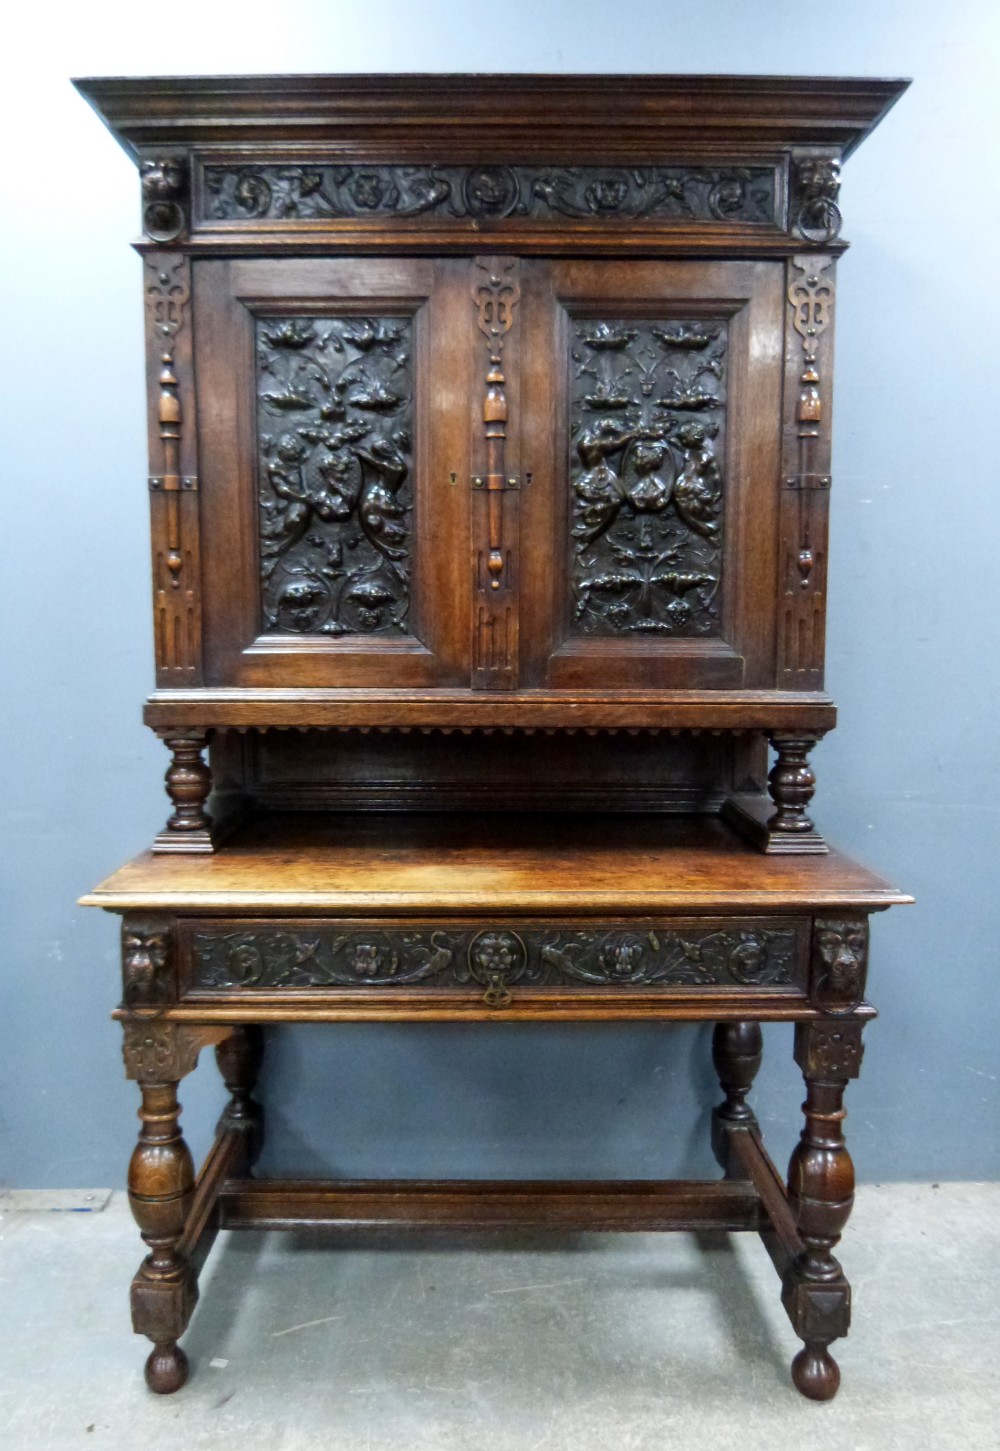 Late 19th century oak cabinet on stand with carved and embossed metal decoration of figures, the